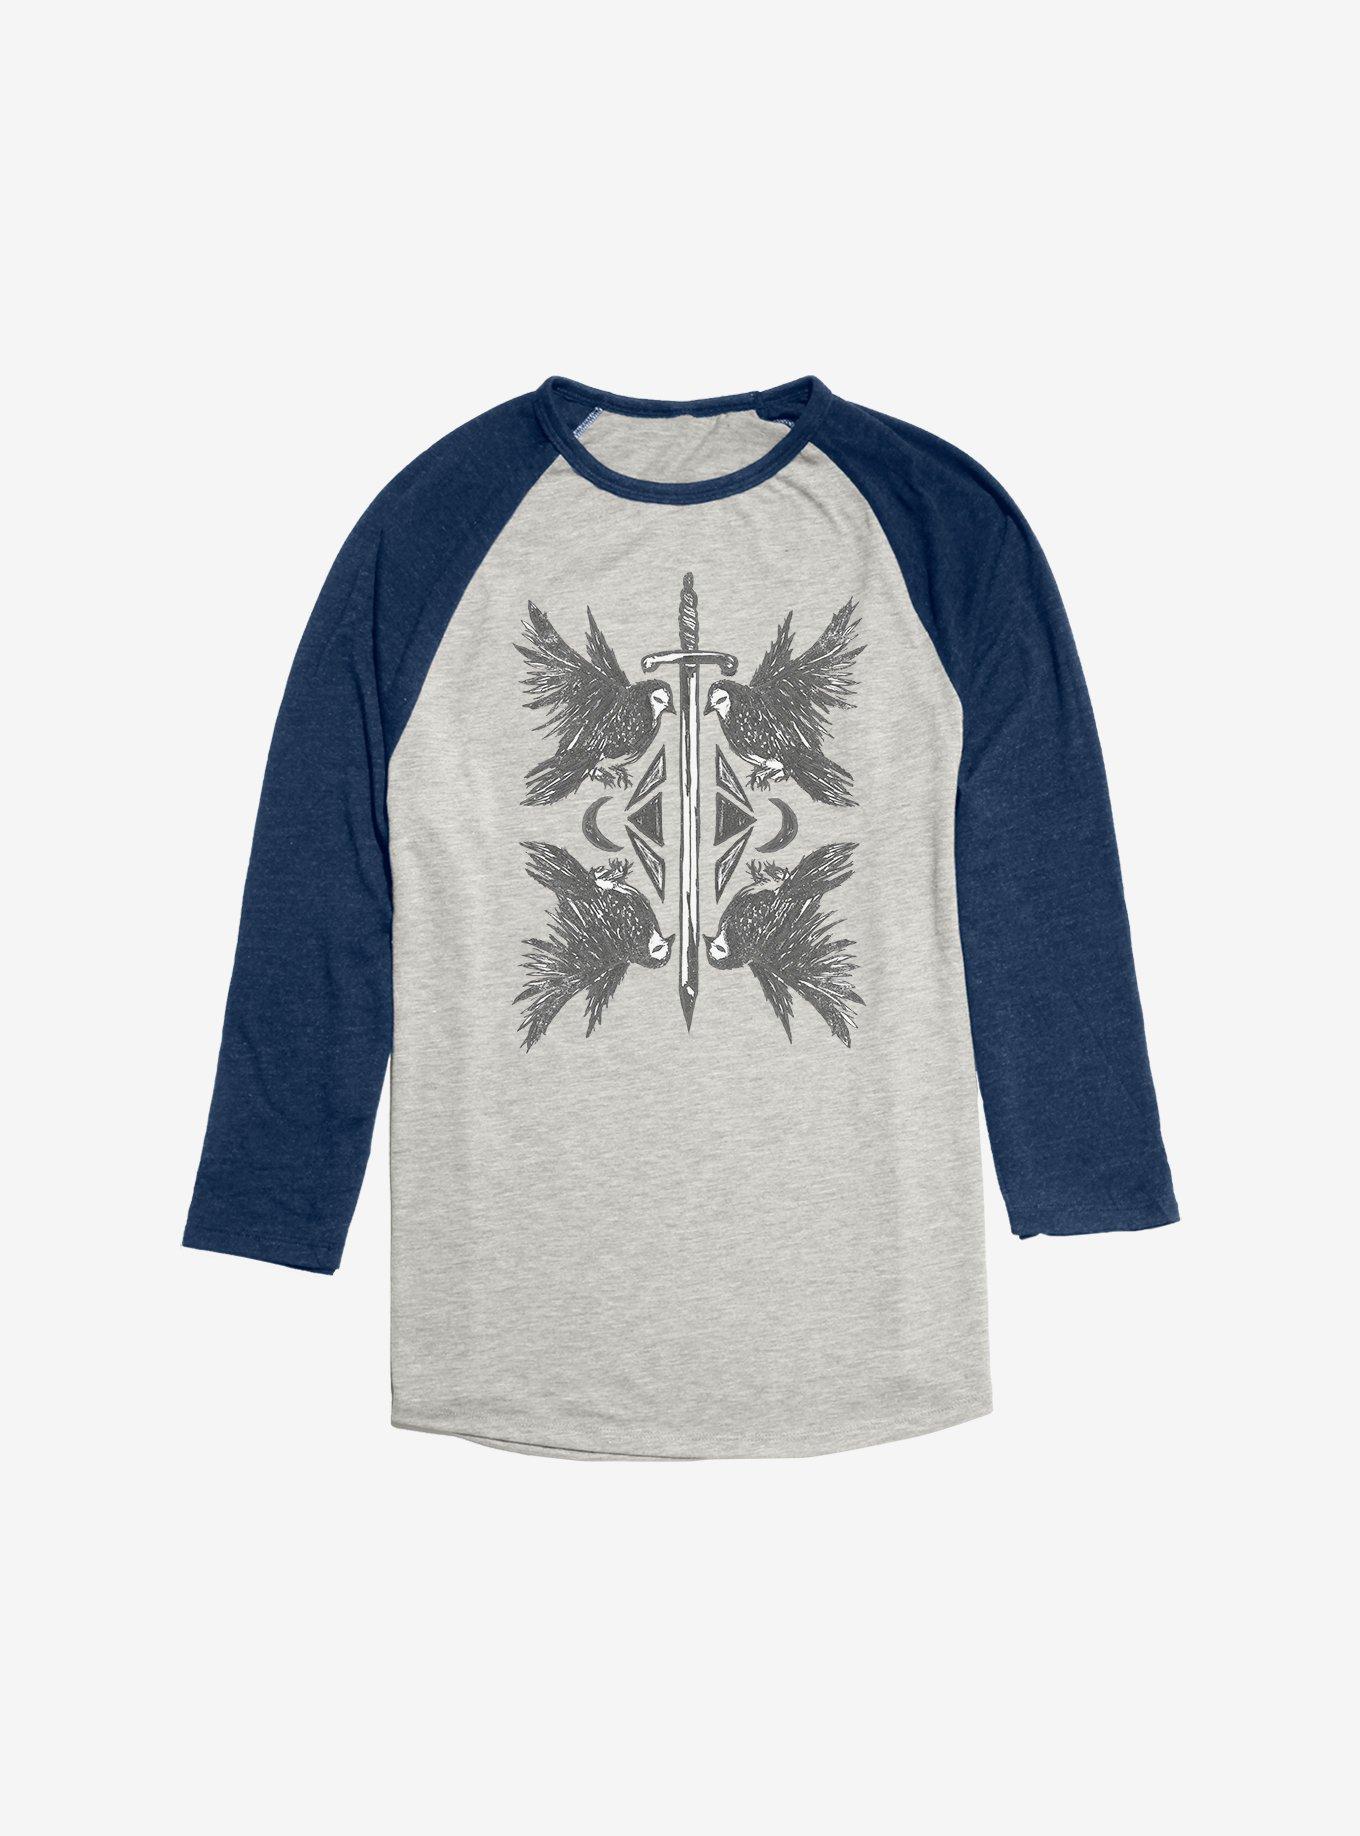 Raven And Sword Raglan, Oatmeal With Navy, hi-res